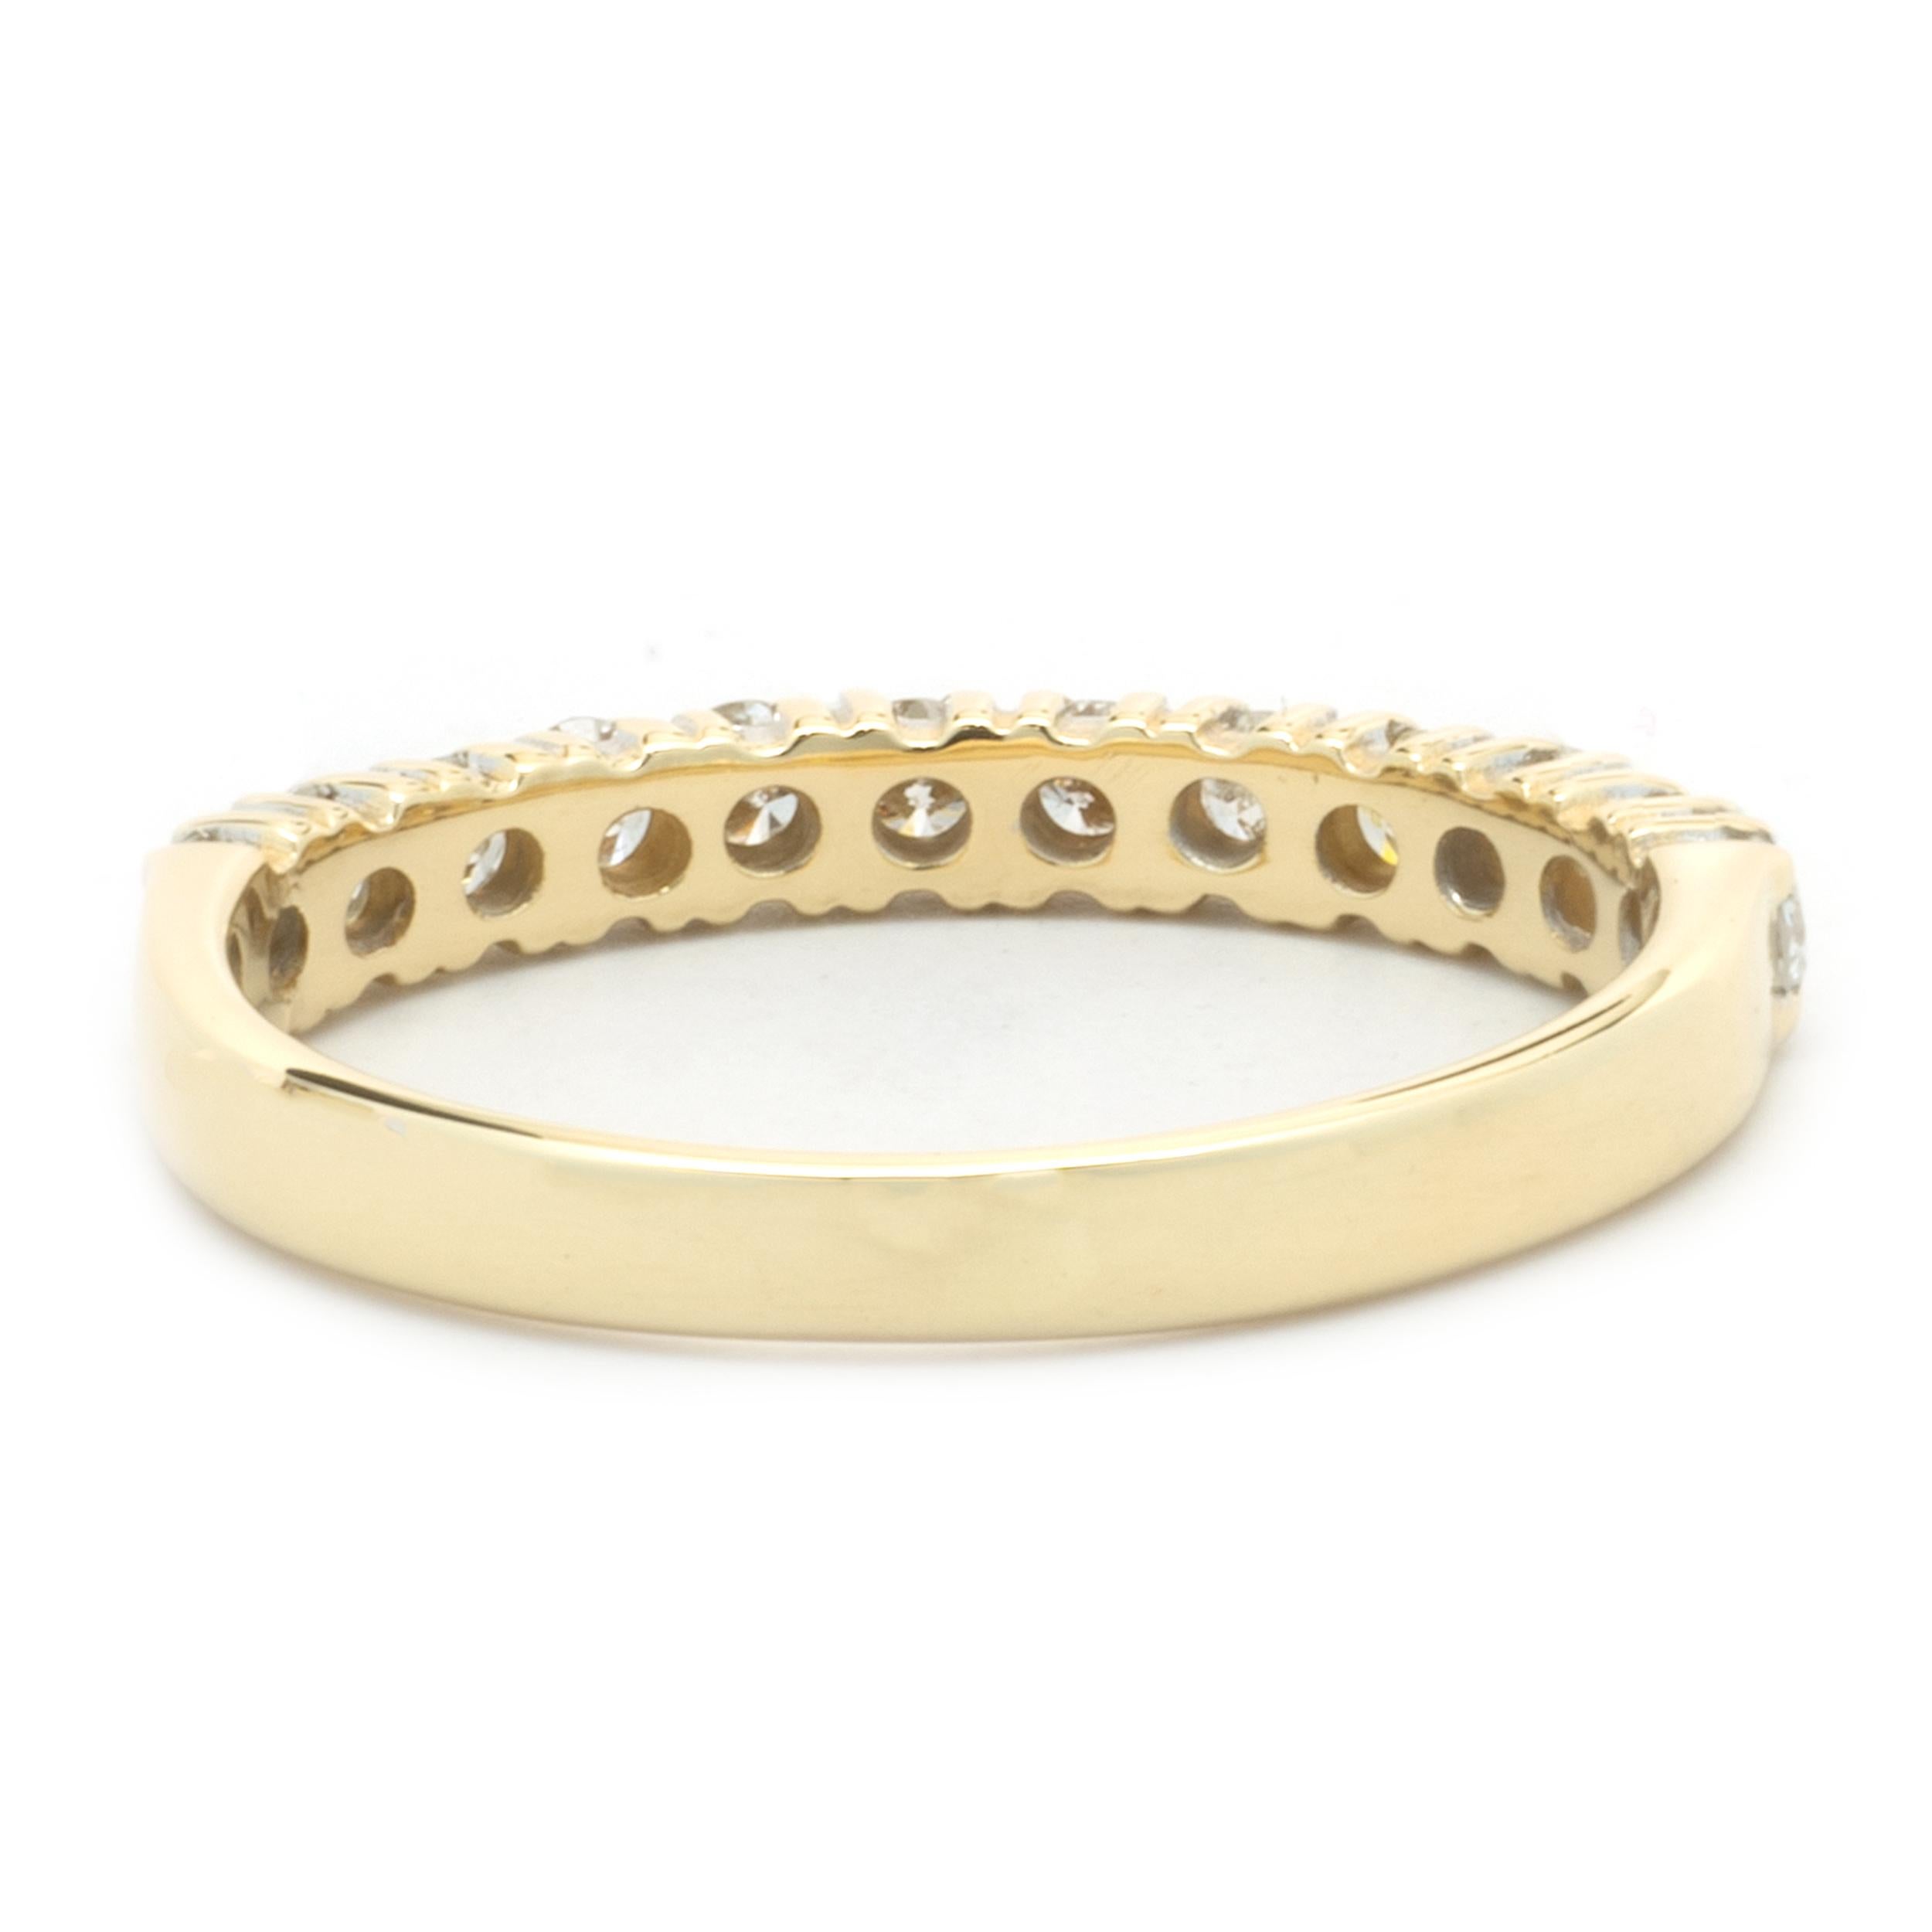 Designer: Custom
Material: 14k yellow gold 
Diamonds: 12 round brilliant cut = .36cttw 
Color: G
Clarity: SI1
Size: 6
Dimensions: ring measures 2.75mm in width
Weight: 1.96 grams
